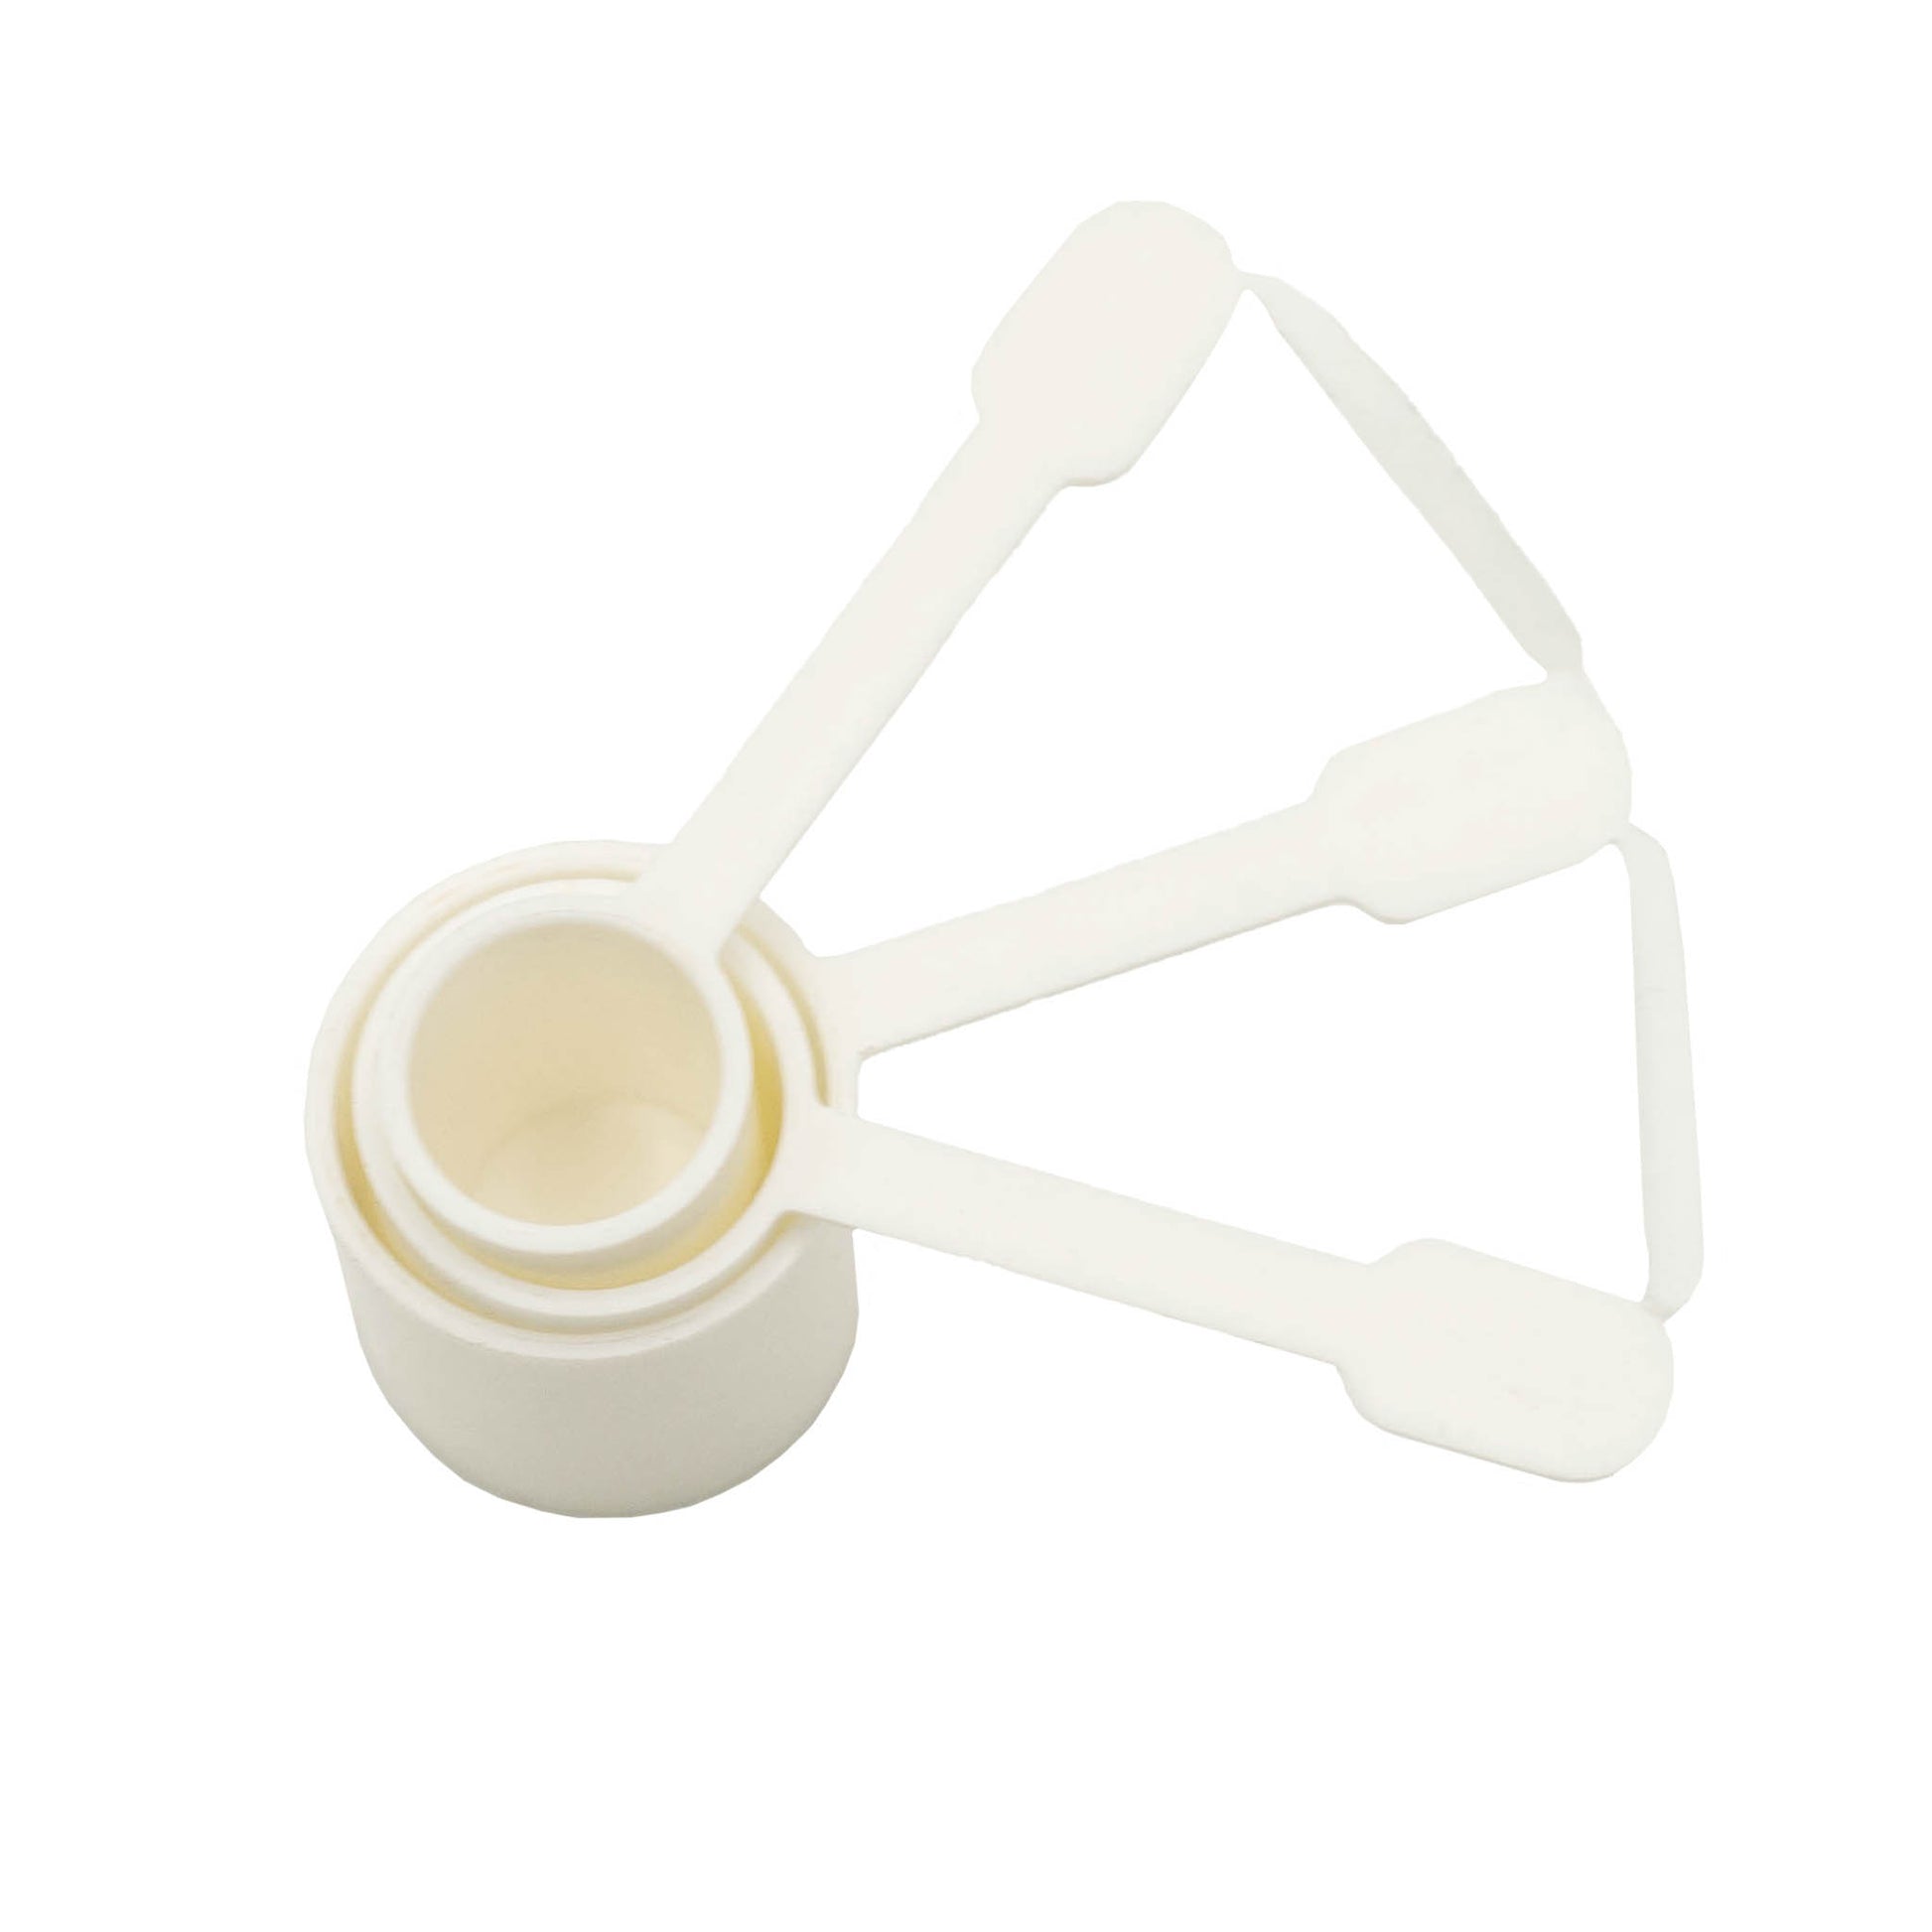 easy to use white plastic sugar scoop in three sizes. 